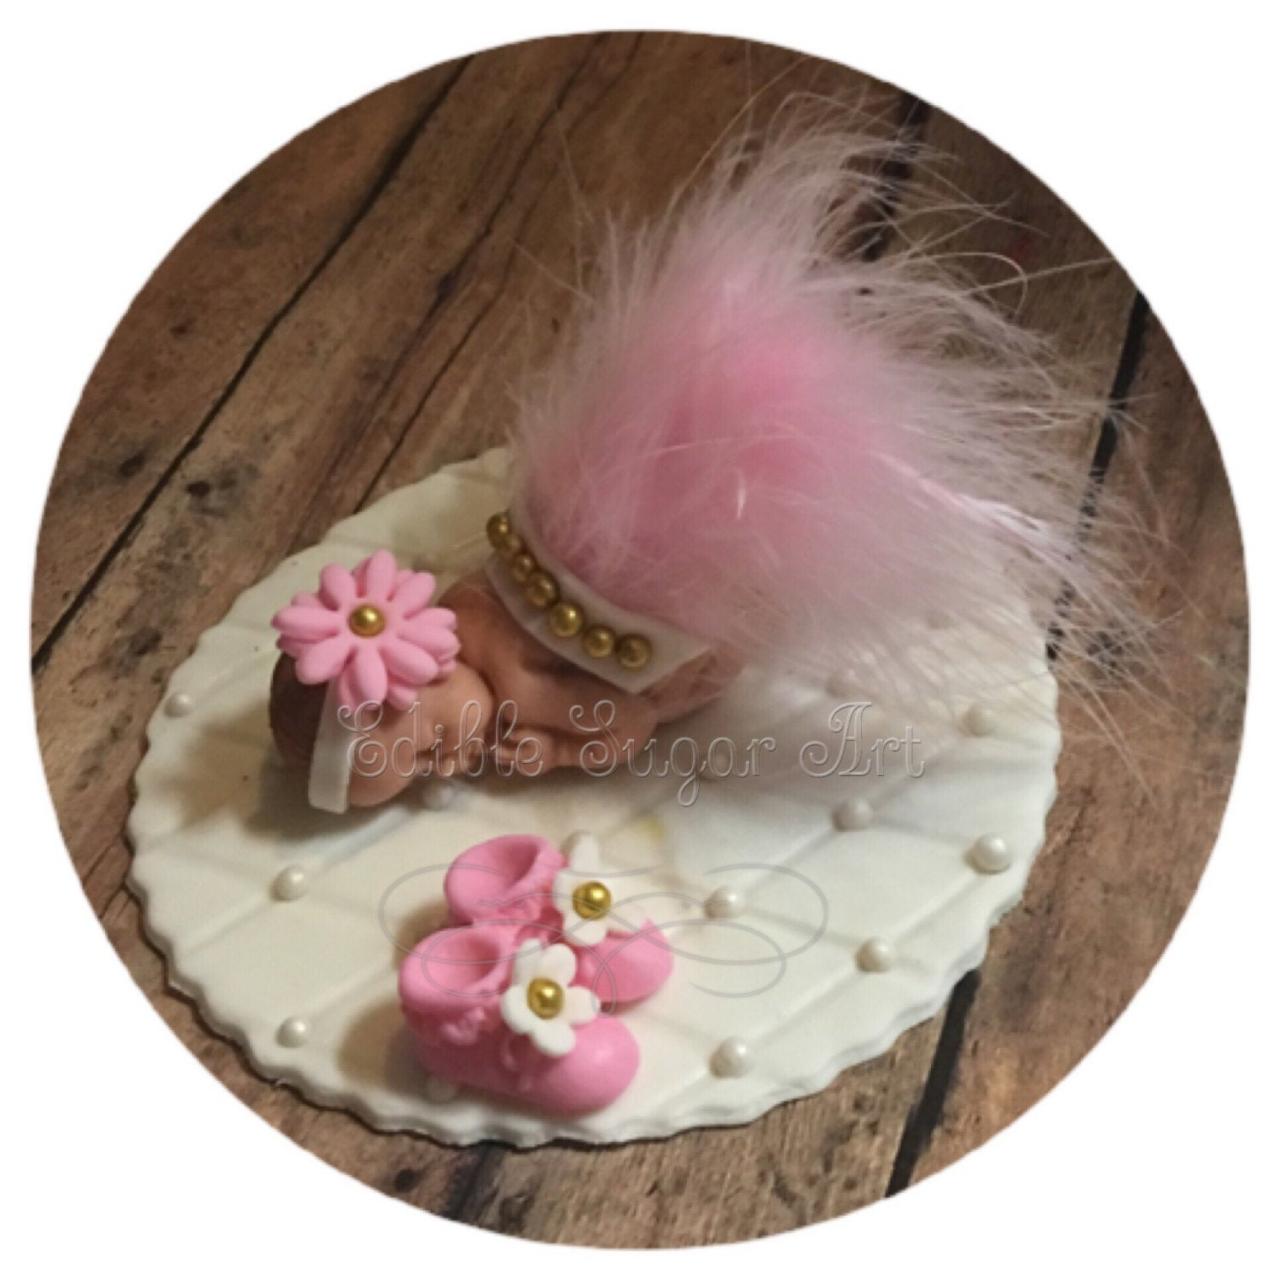 BABY SHOWER CAKE Pink feather tutu Topper Fondant baby Tutu Cake Topper Fondant Cake Topper baby girl